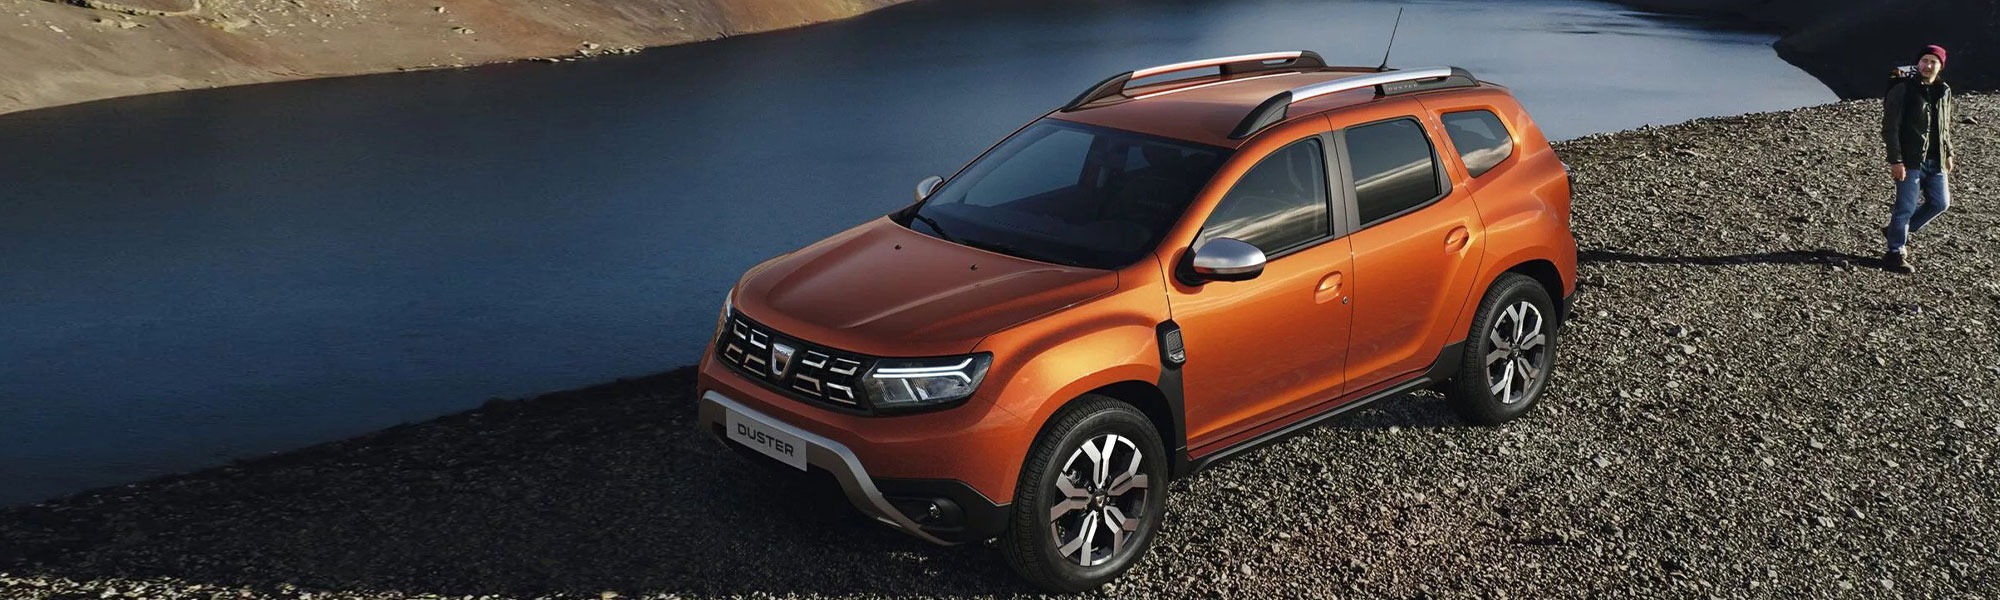 dacia duster-commercial Banner